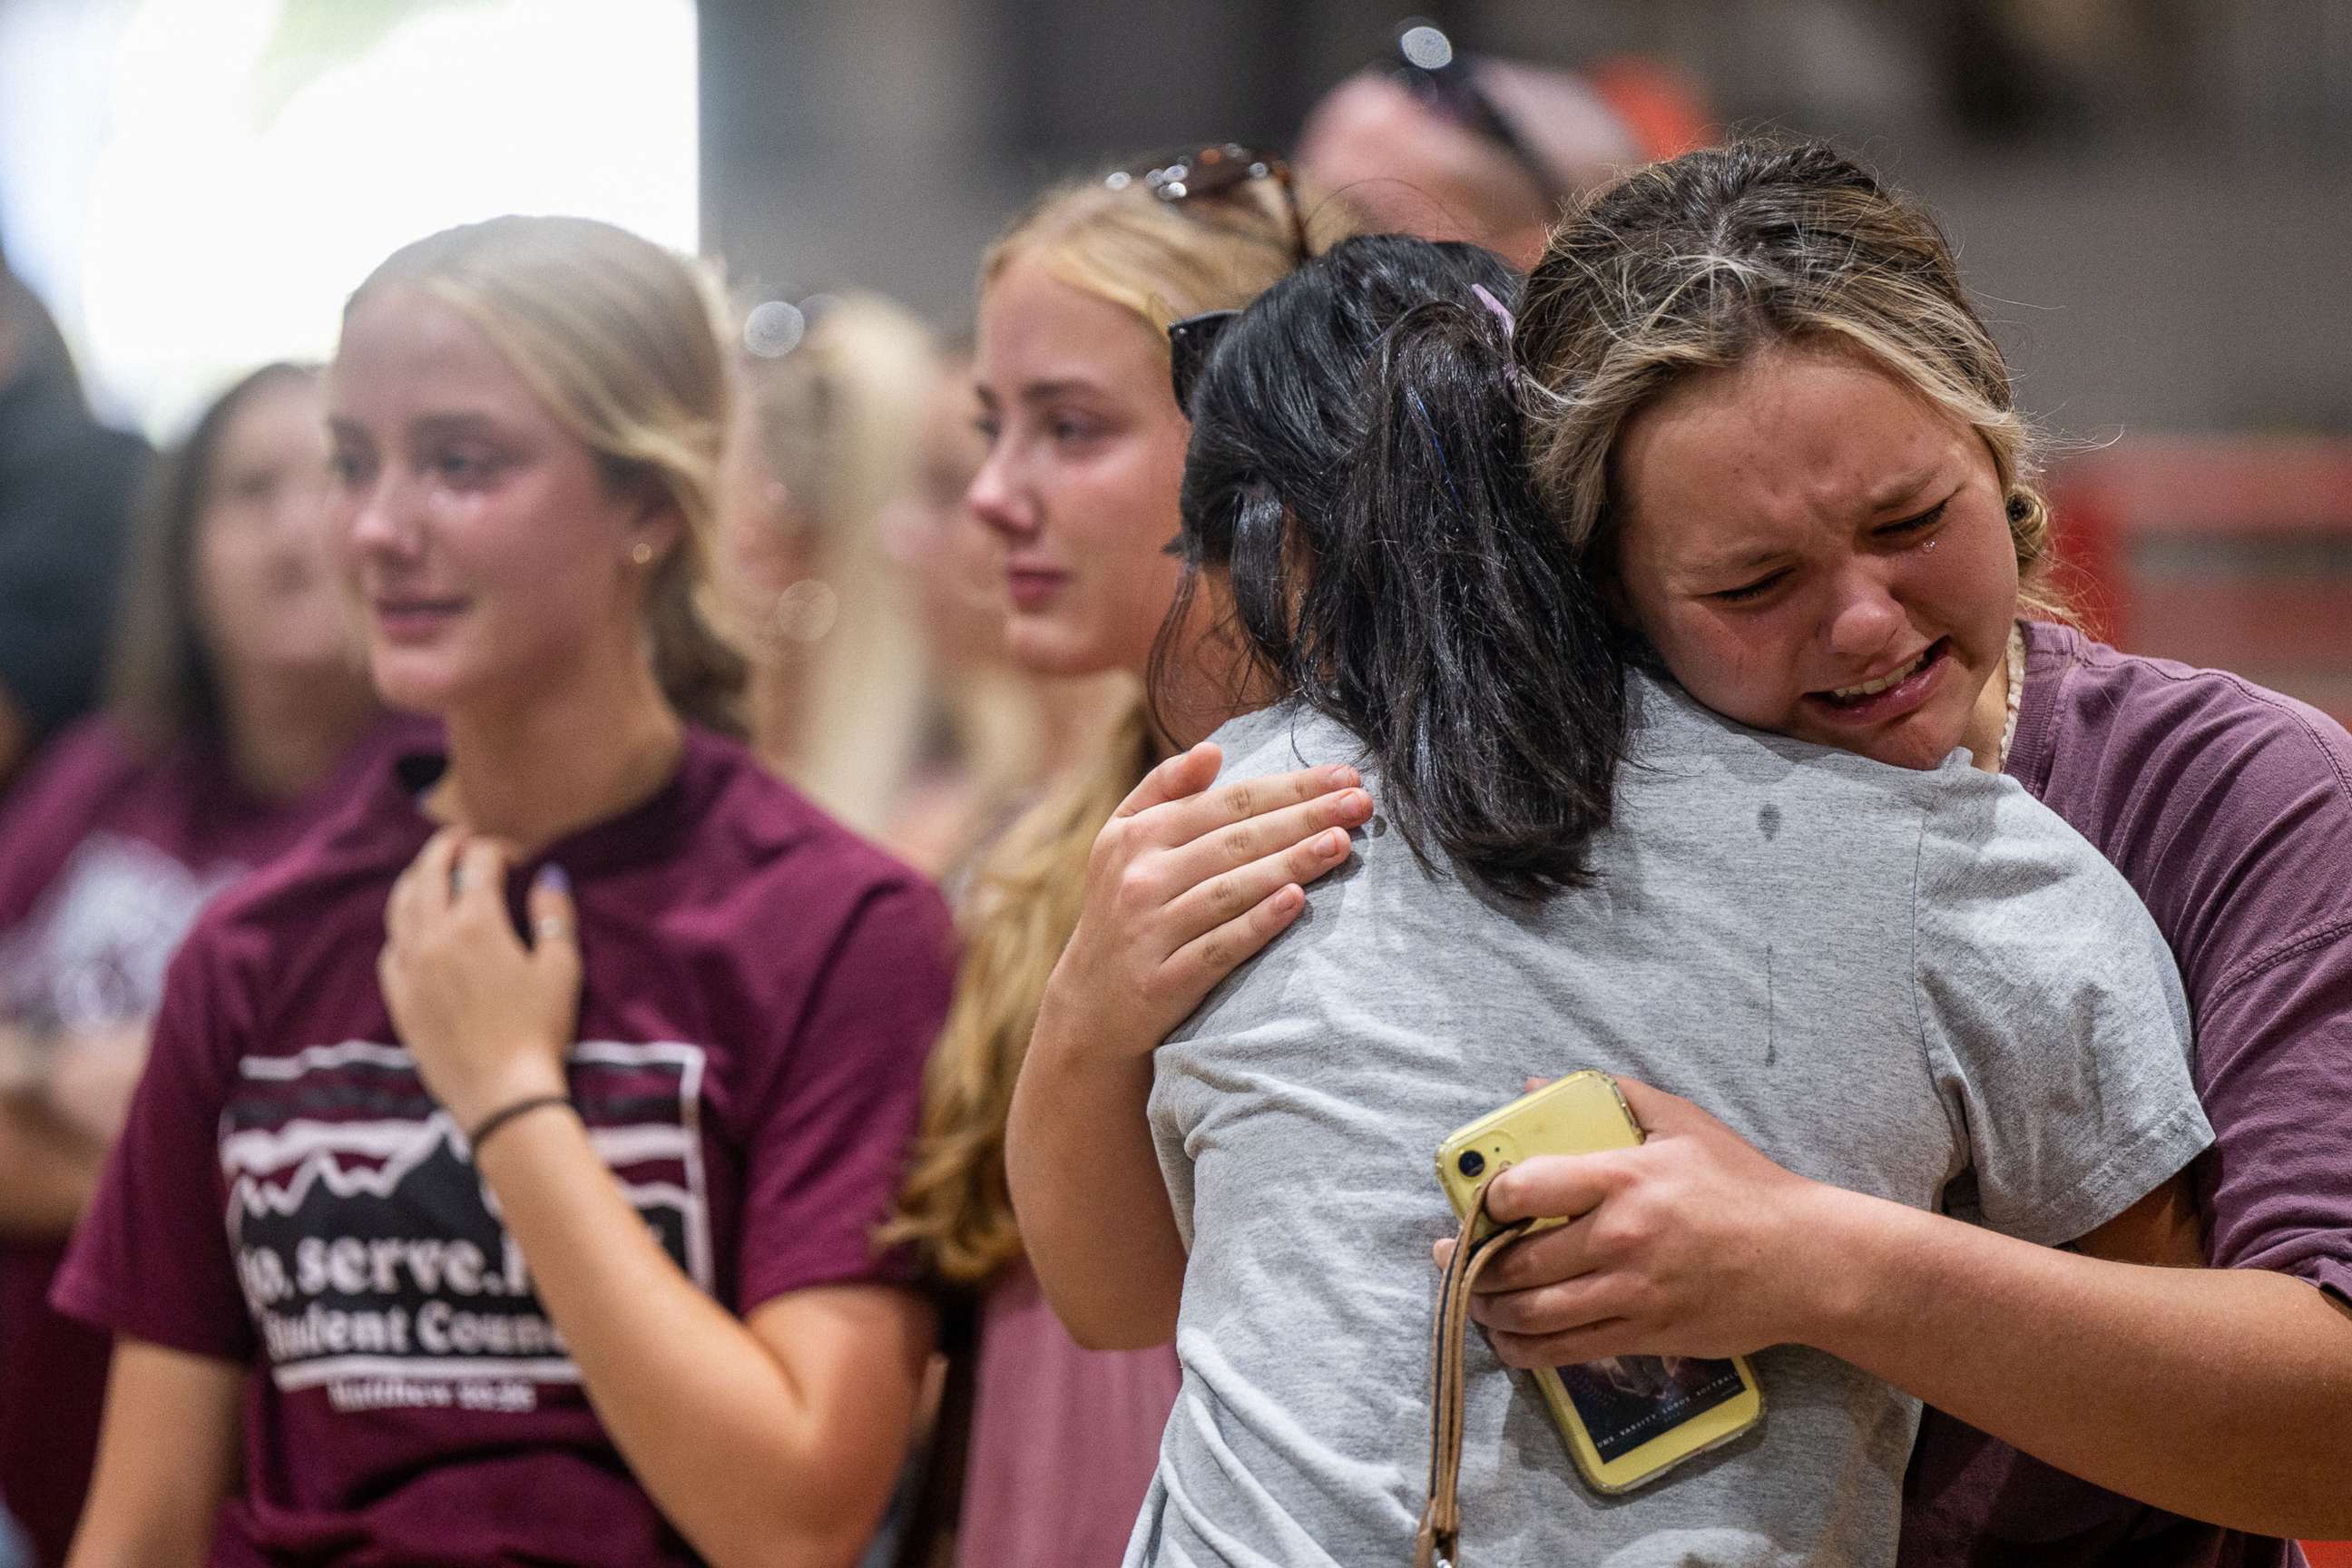 PHOTO: Community members embrace and mourn together at a vigil for the victims in the mass shooting at Rob Elementary School, May 25, 2022 in Uvalde, Texas.